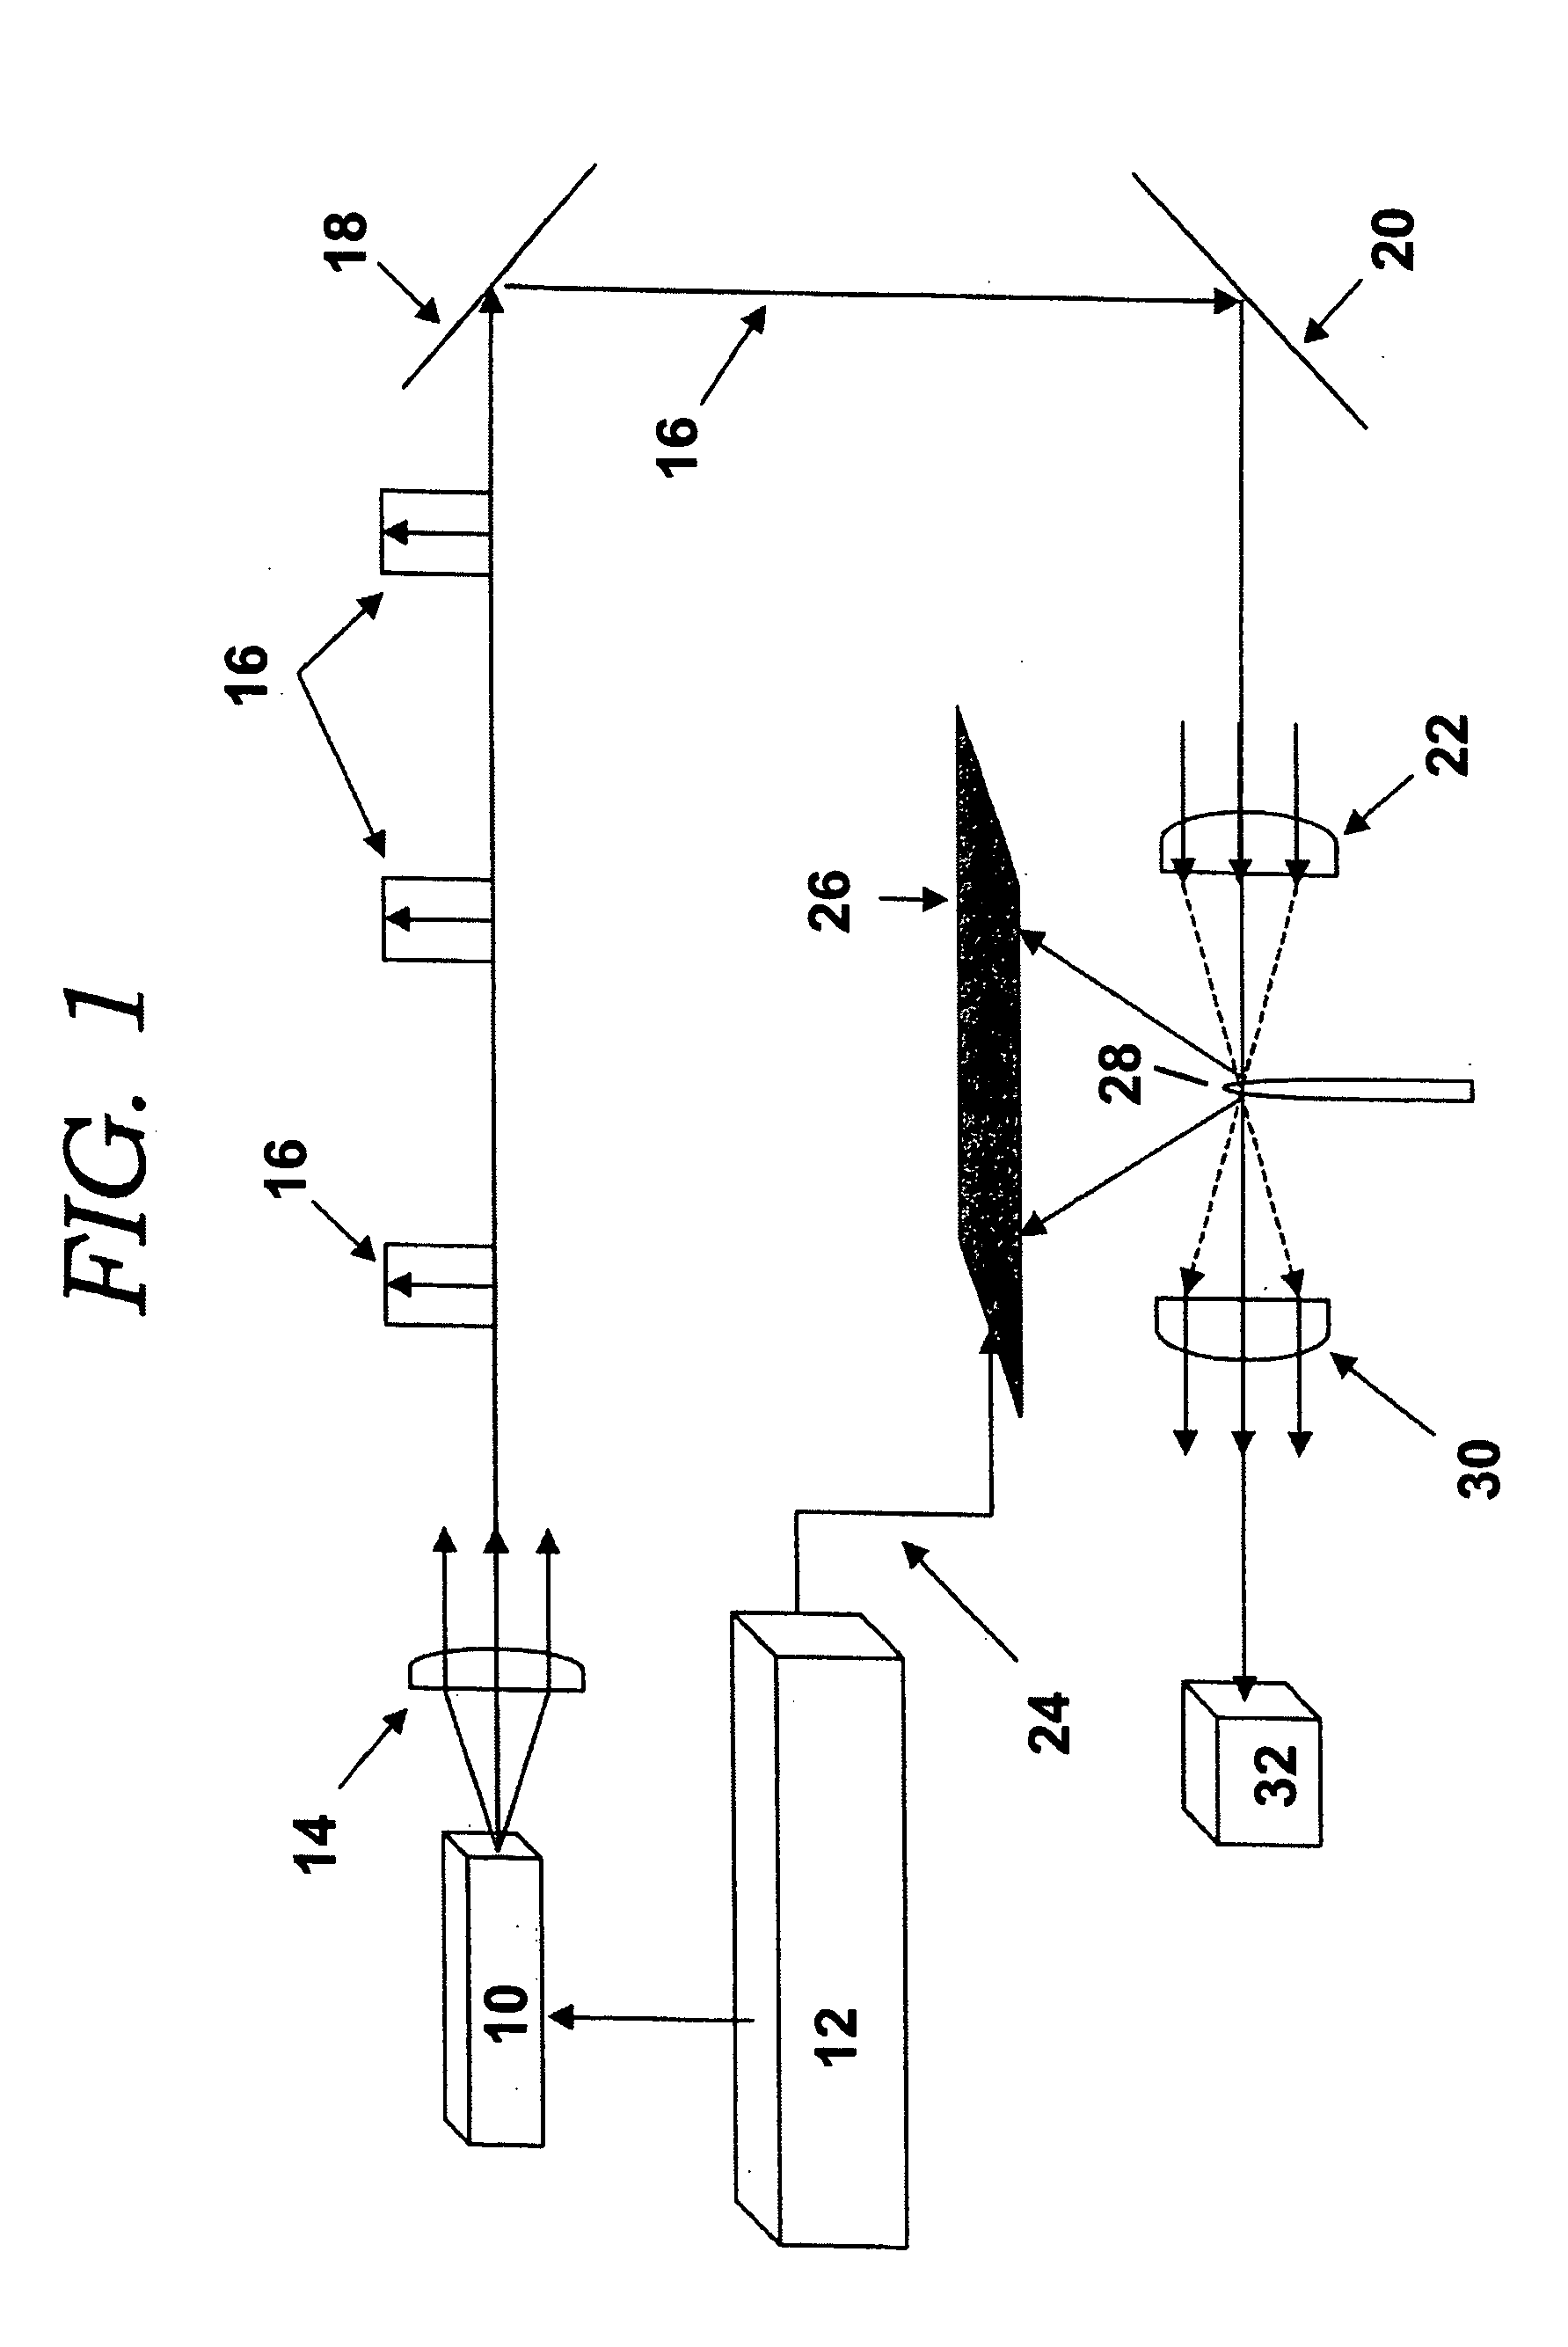 Laser stimulated atom probe characterization of semiconductor and dielectric structures